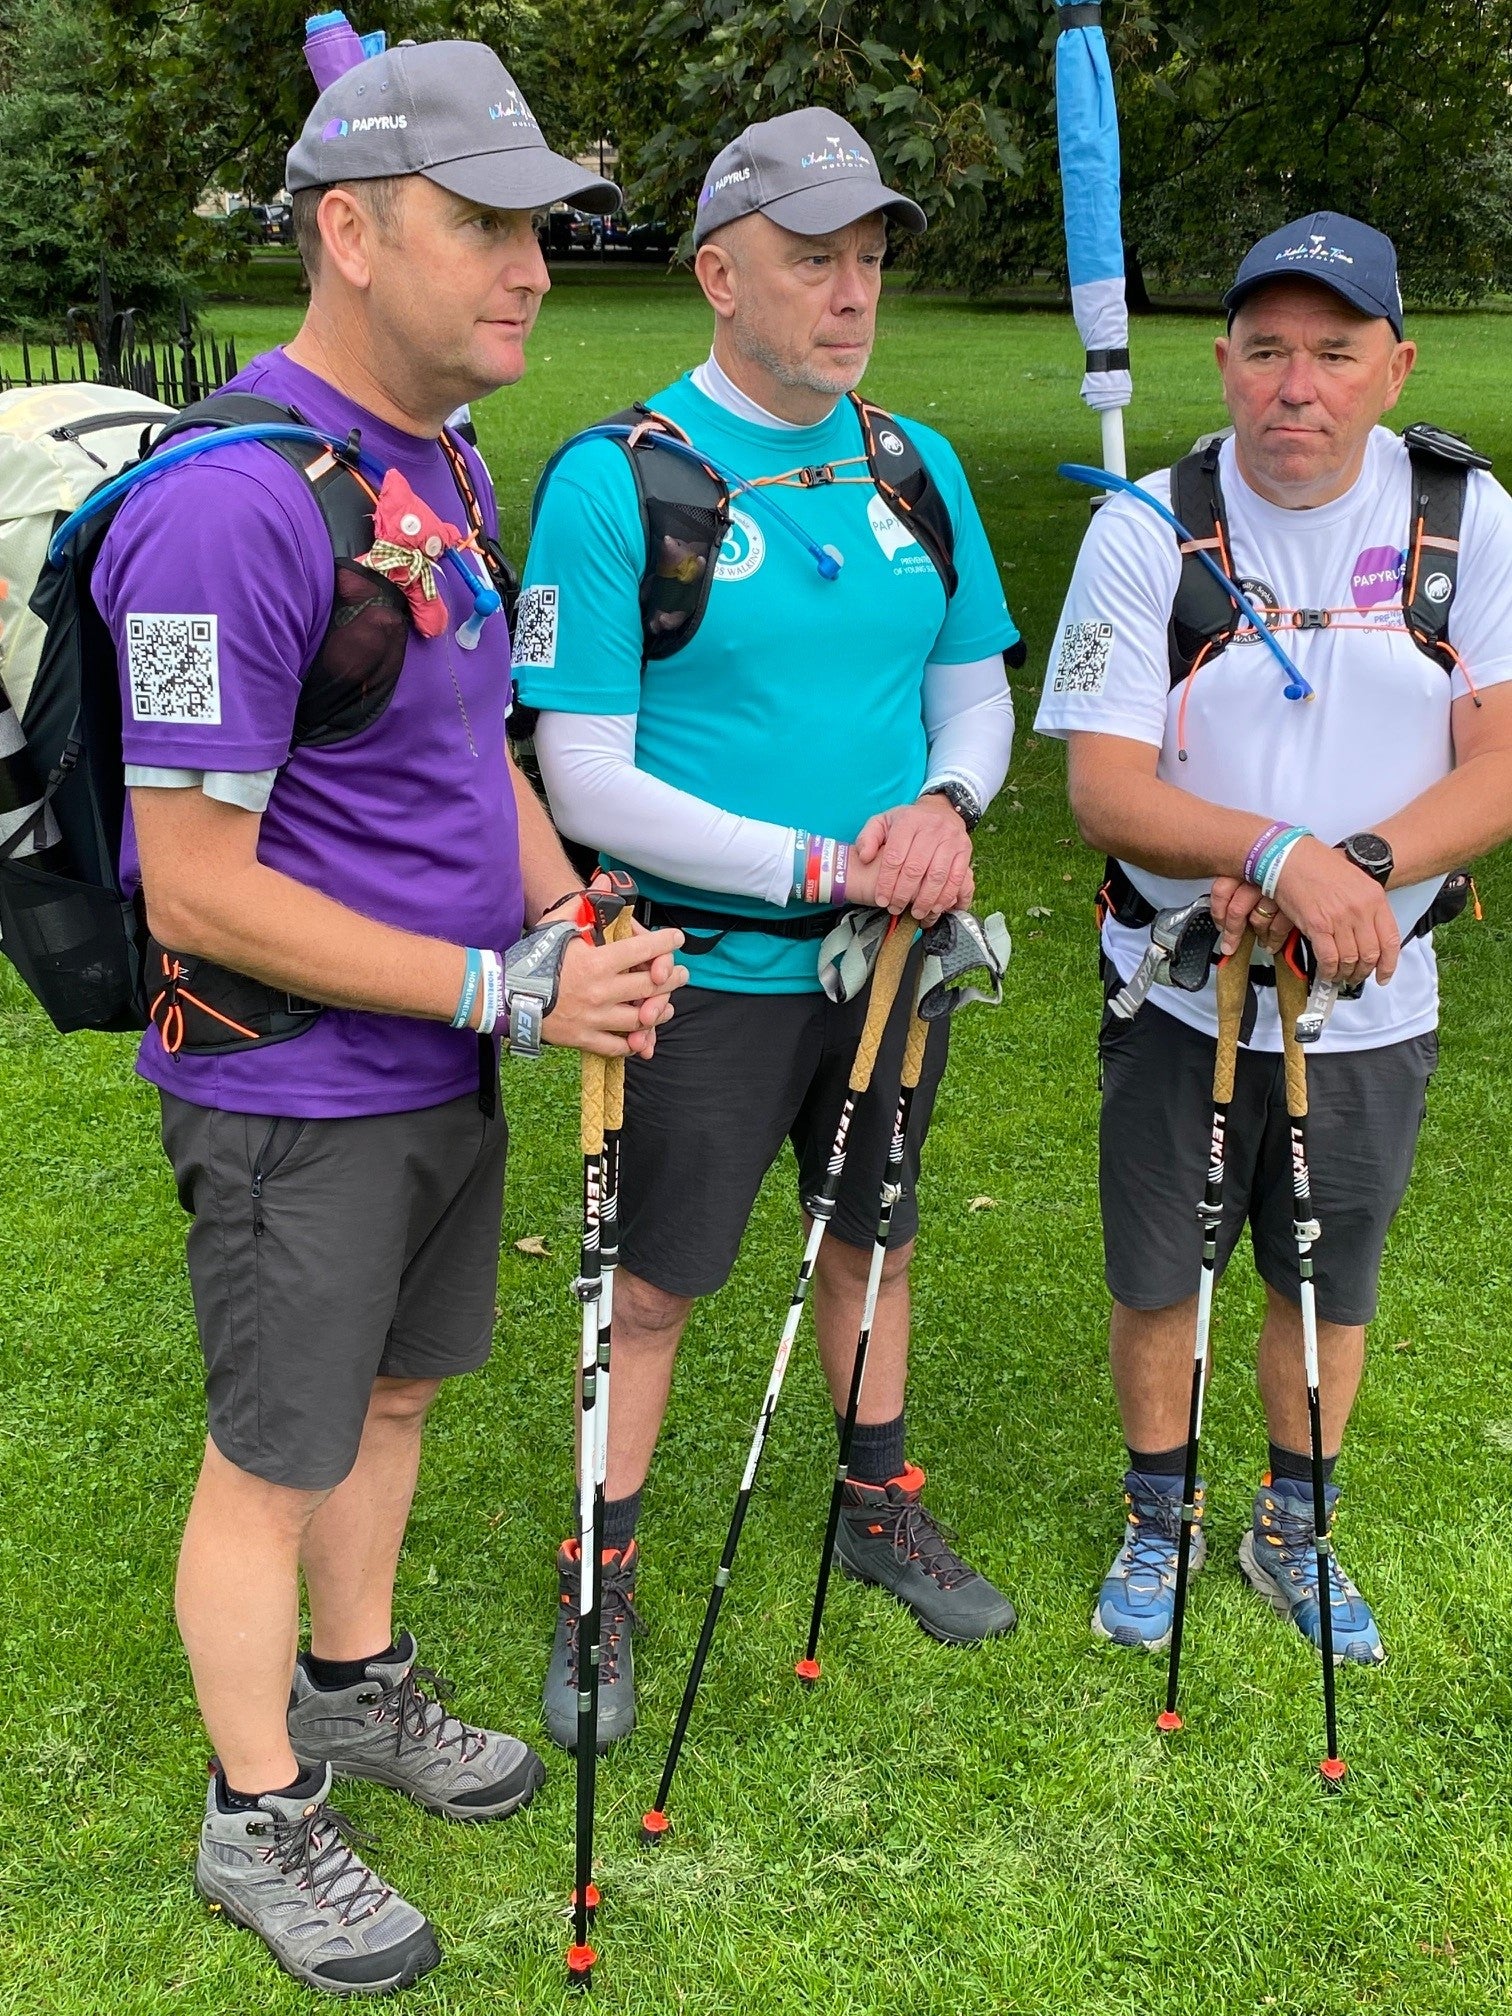 The three dads walking have said they will use the time to talk about their mental health (PAPYRUS/PA)